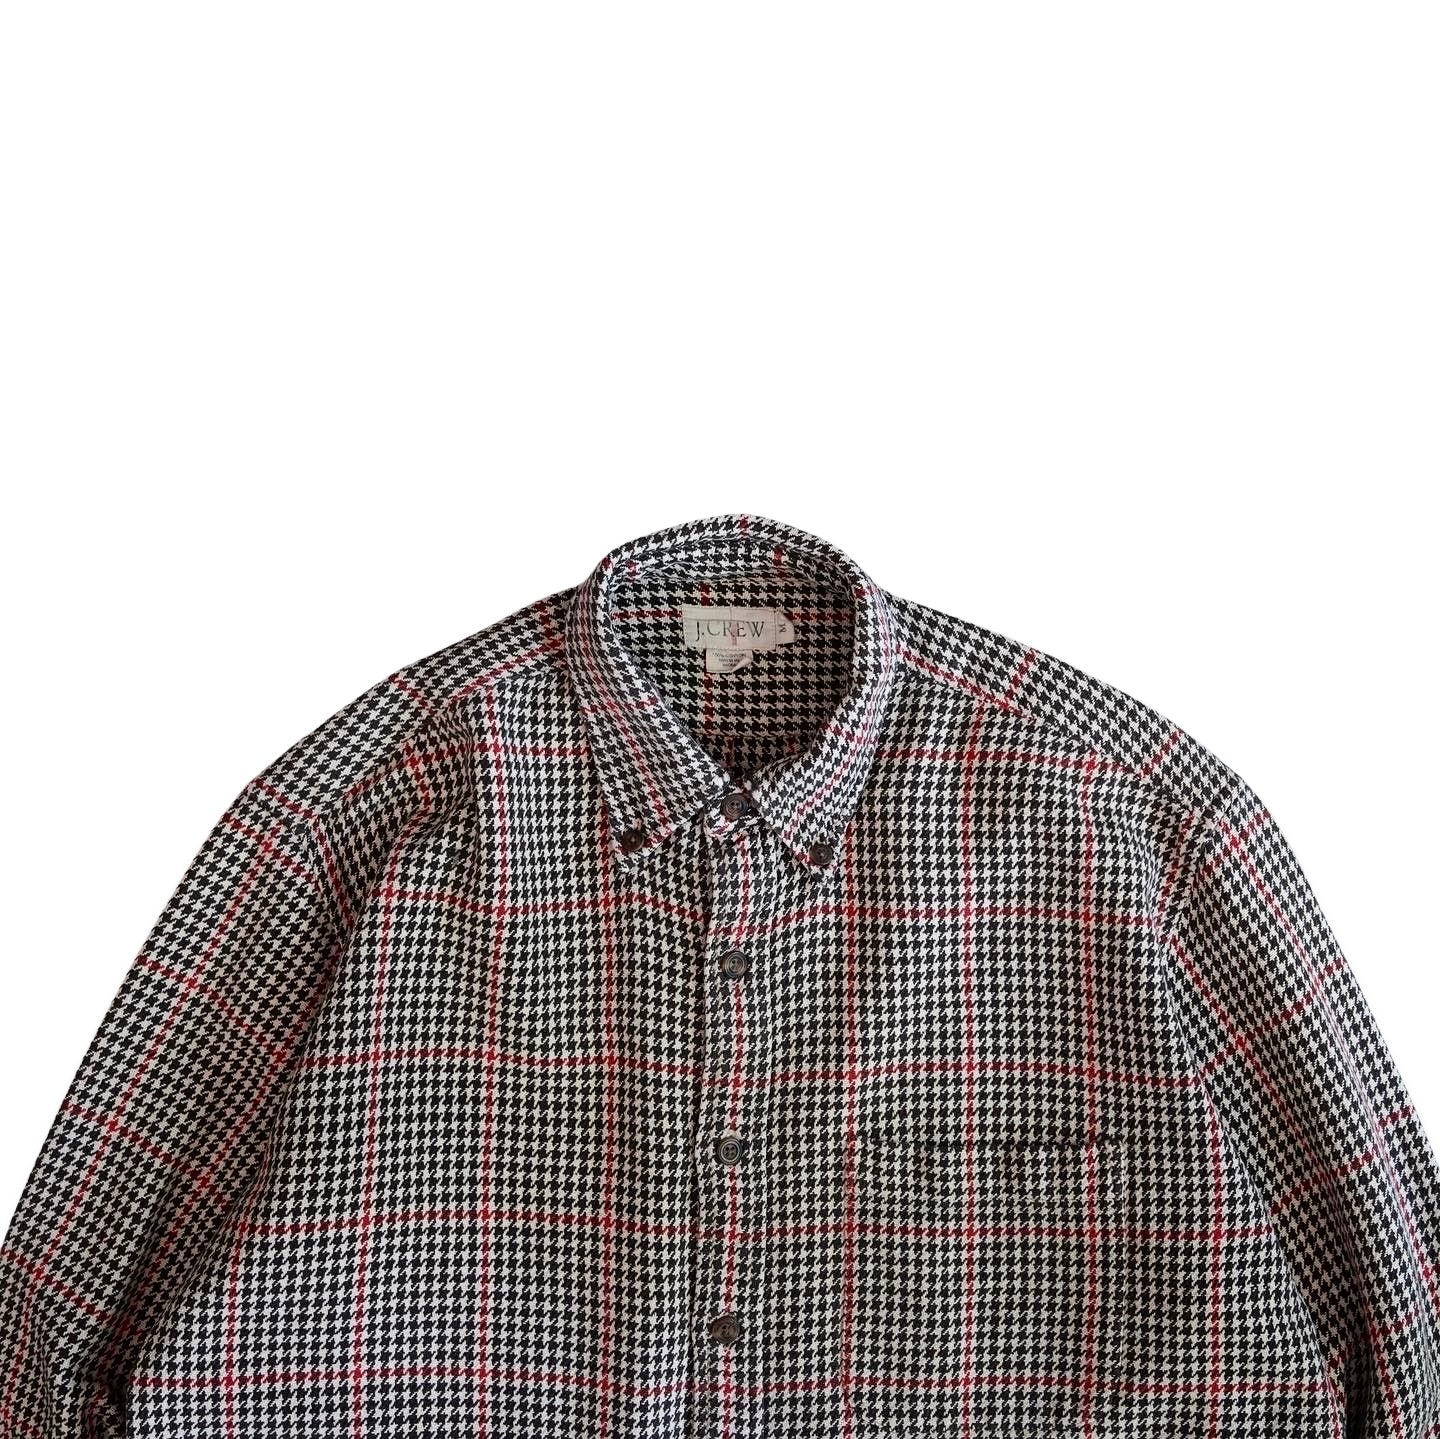 J.Crew Heavy Cotton Houndstooth Woven Shirt